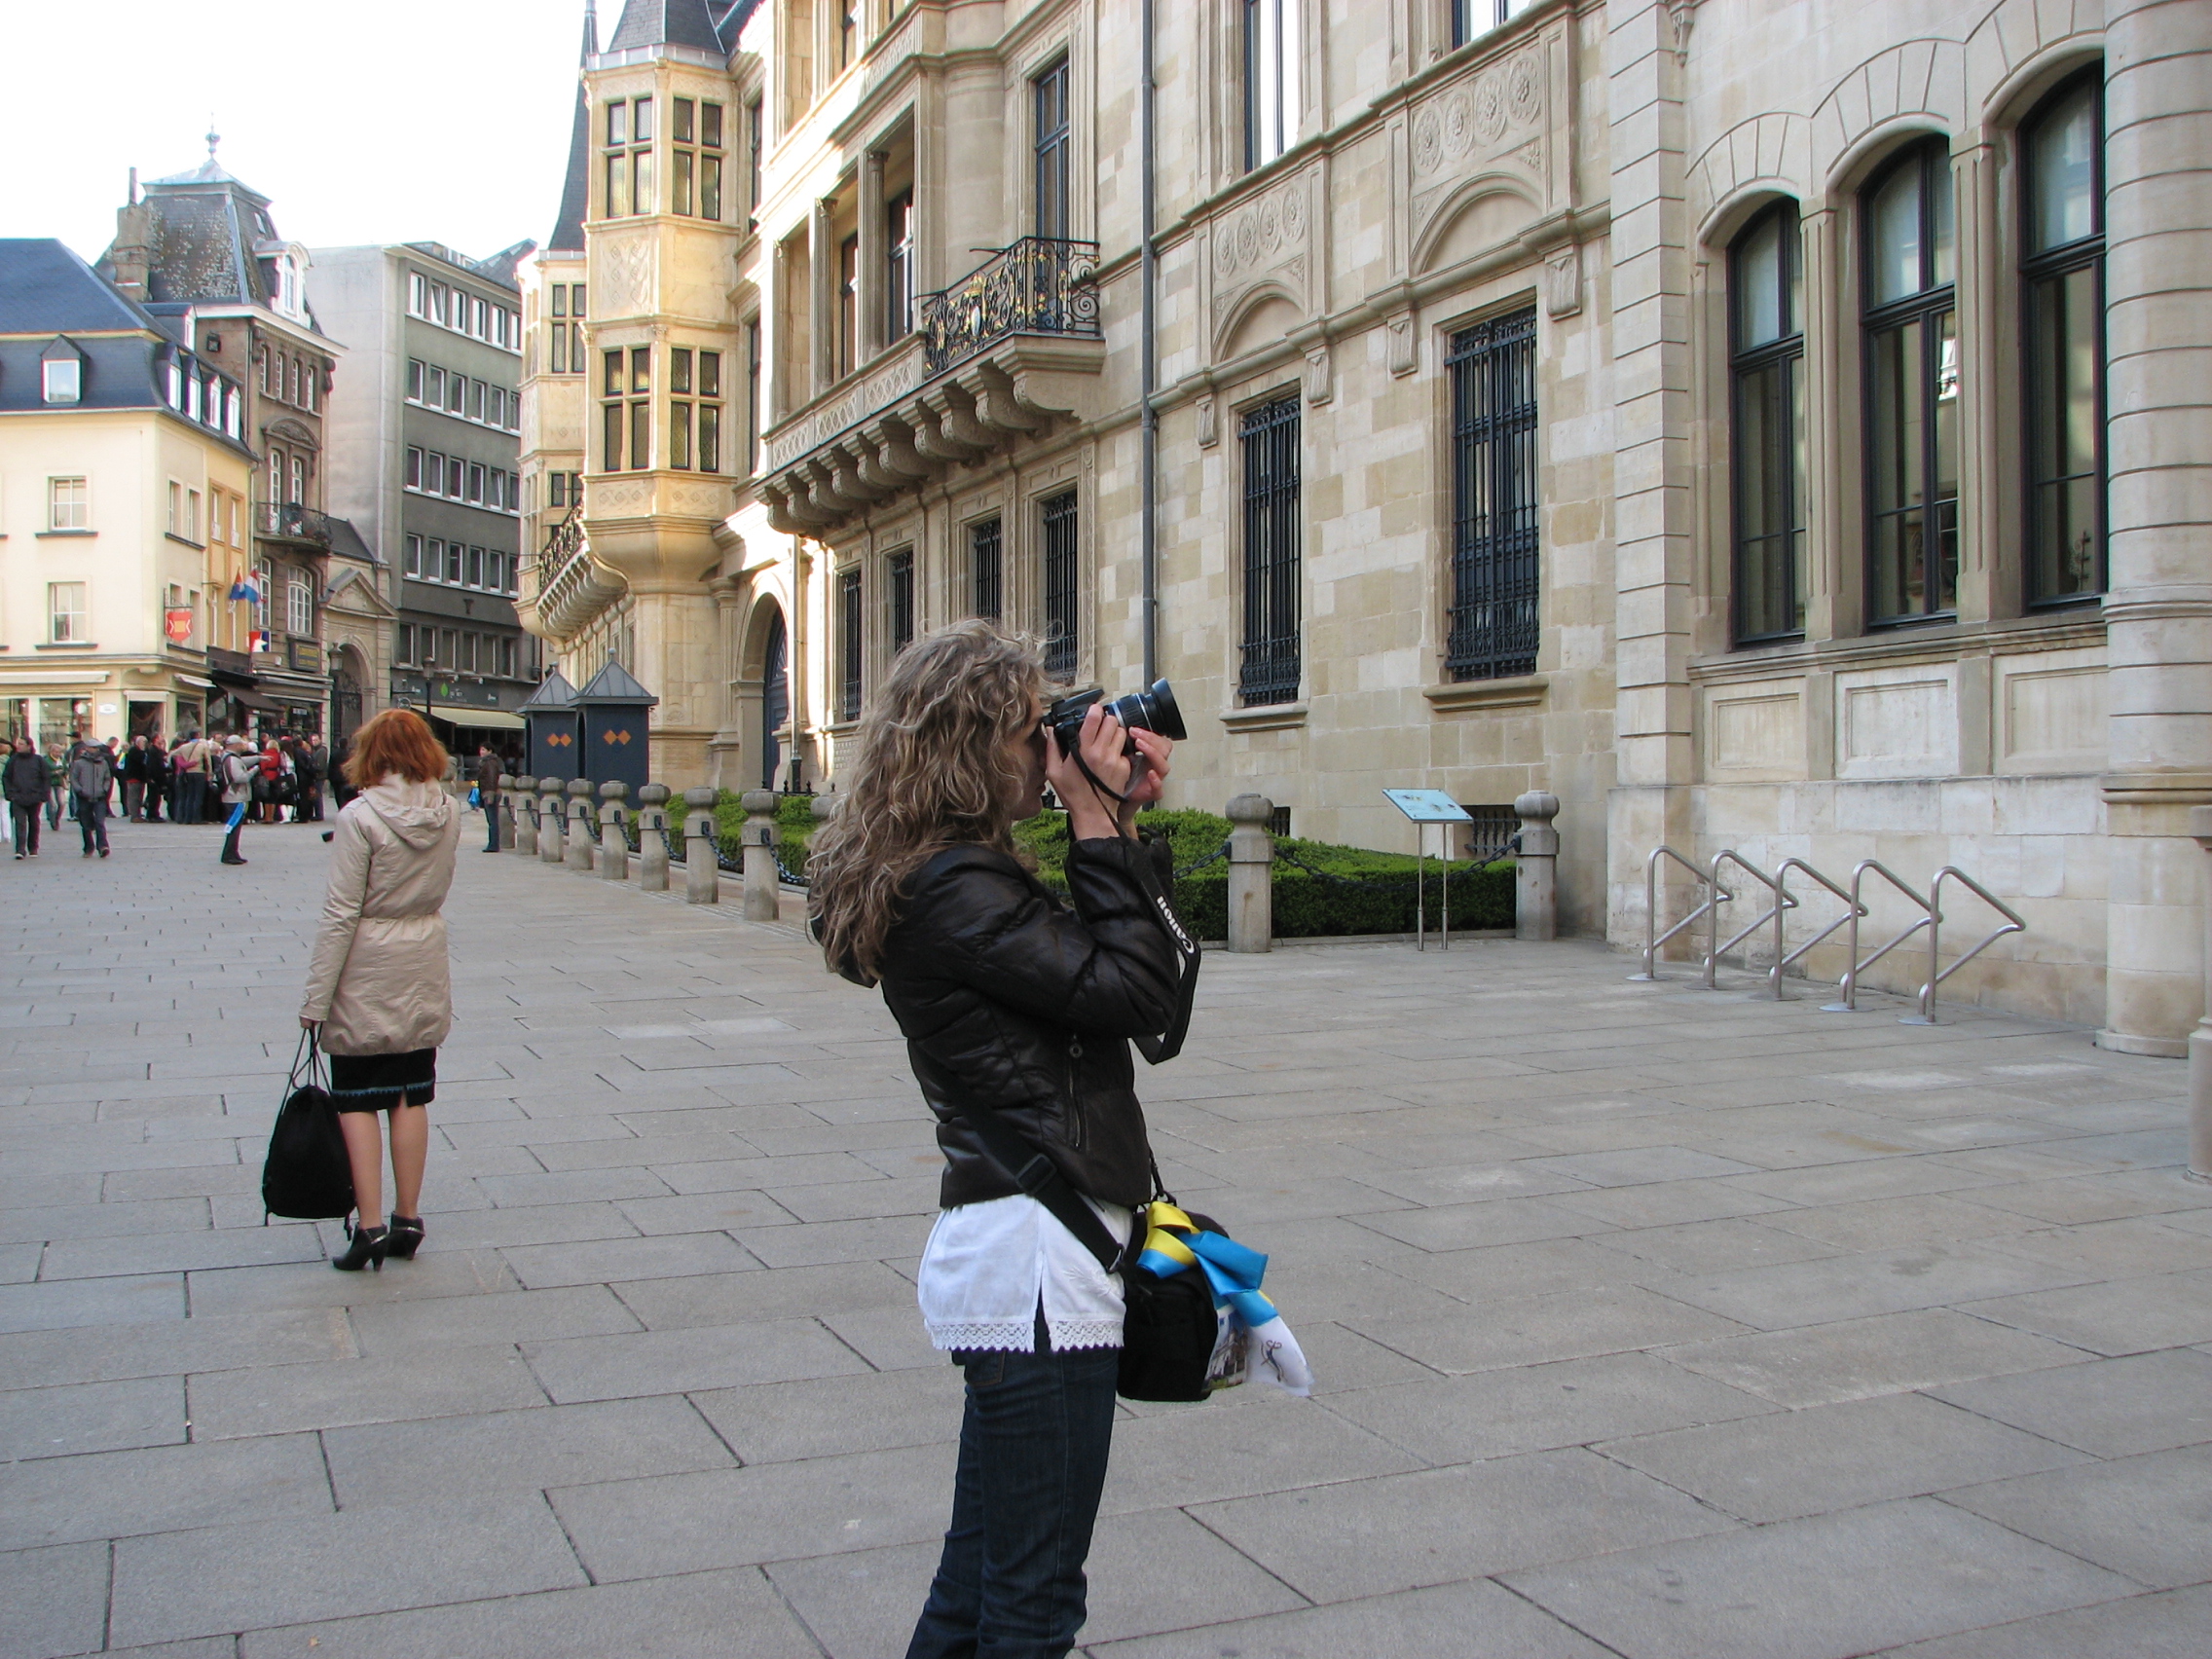 A girl taking a photo with a Canon DSLR